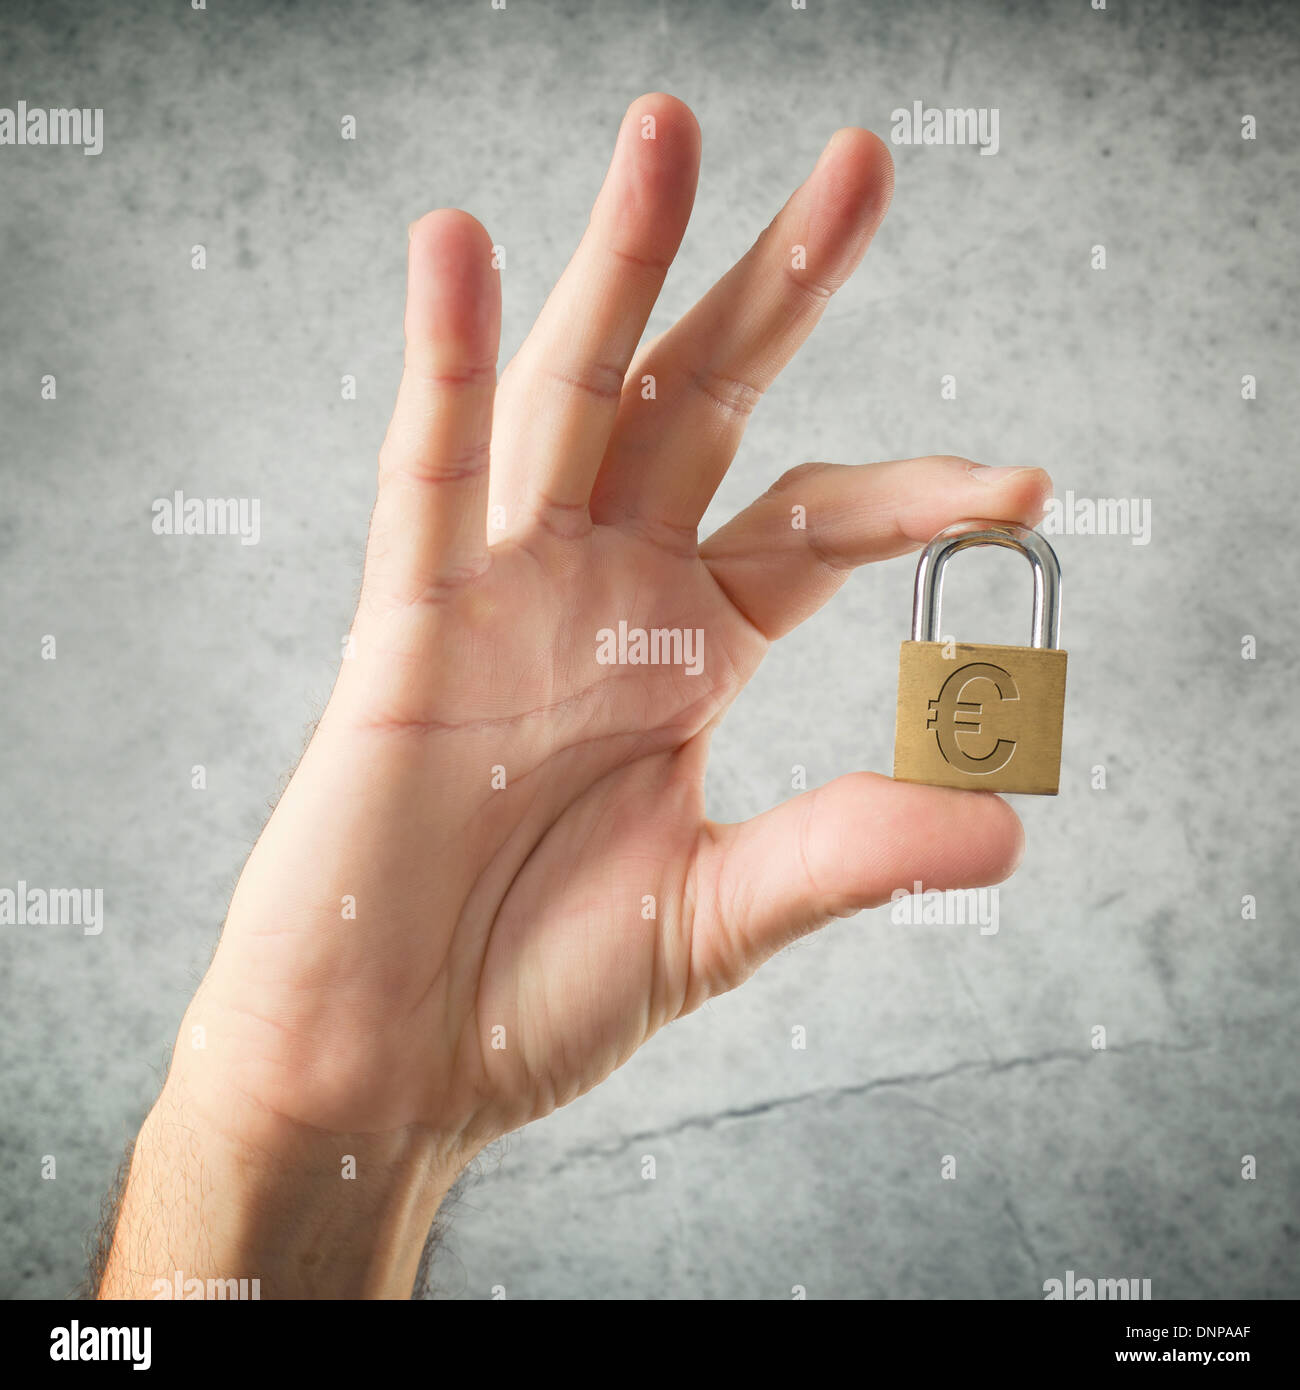 Hand holding padlock with European Union Euro currency symbol. Security and insurance concept. Stock Photo